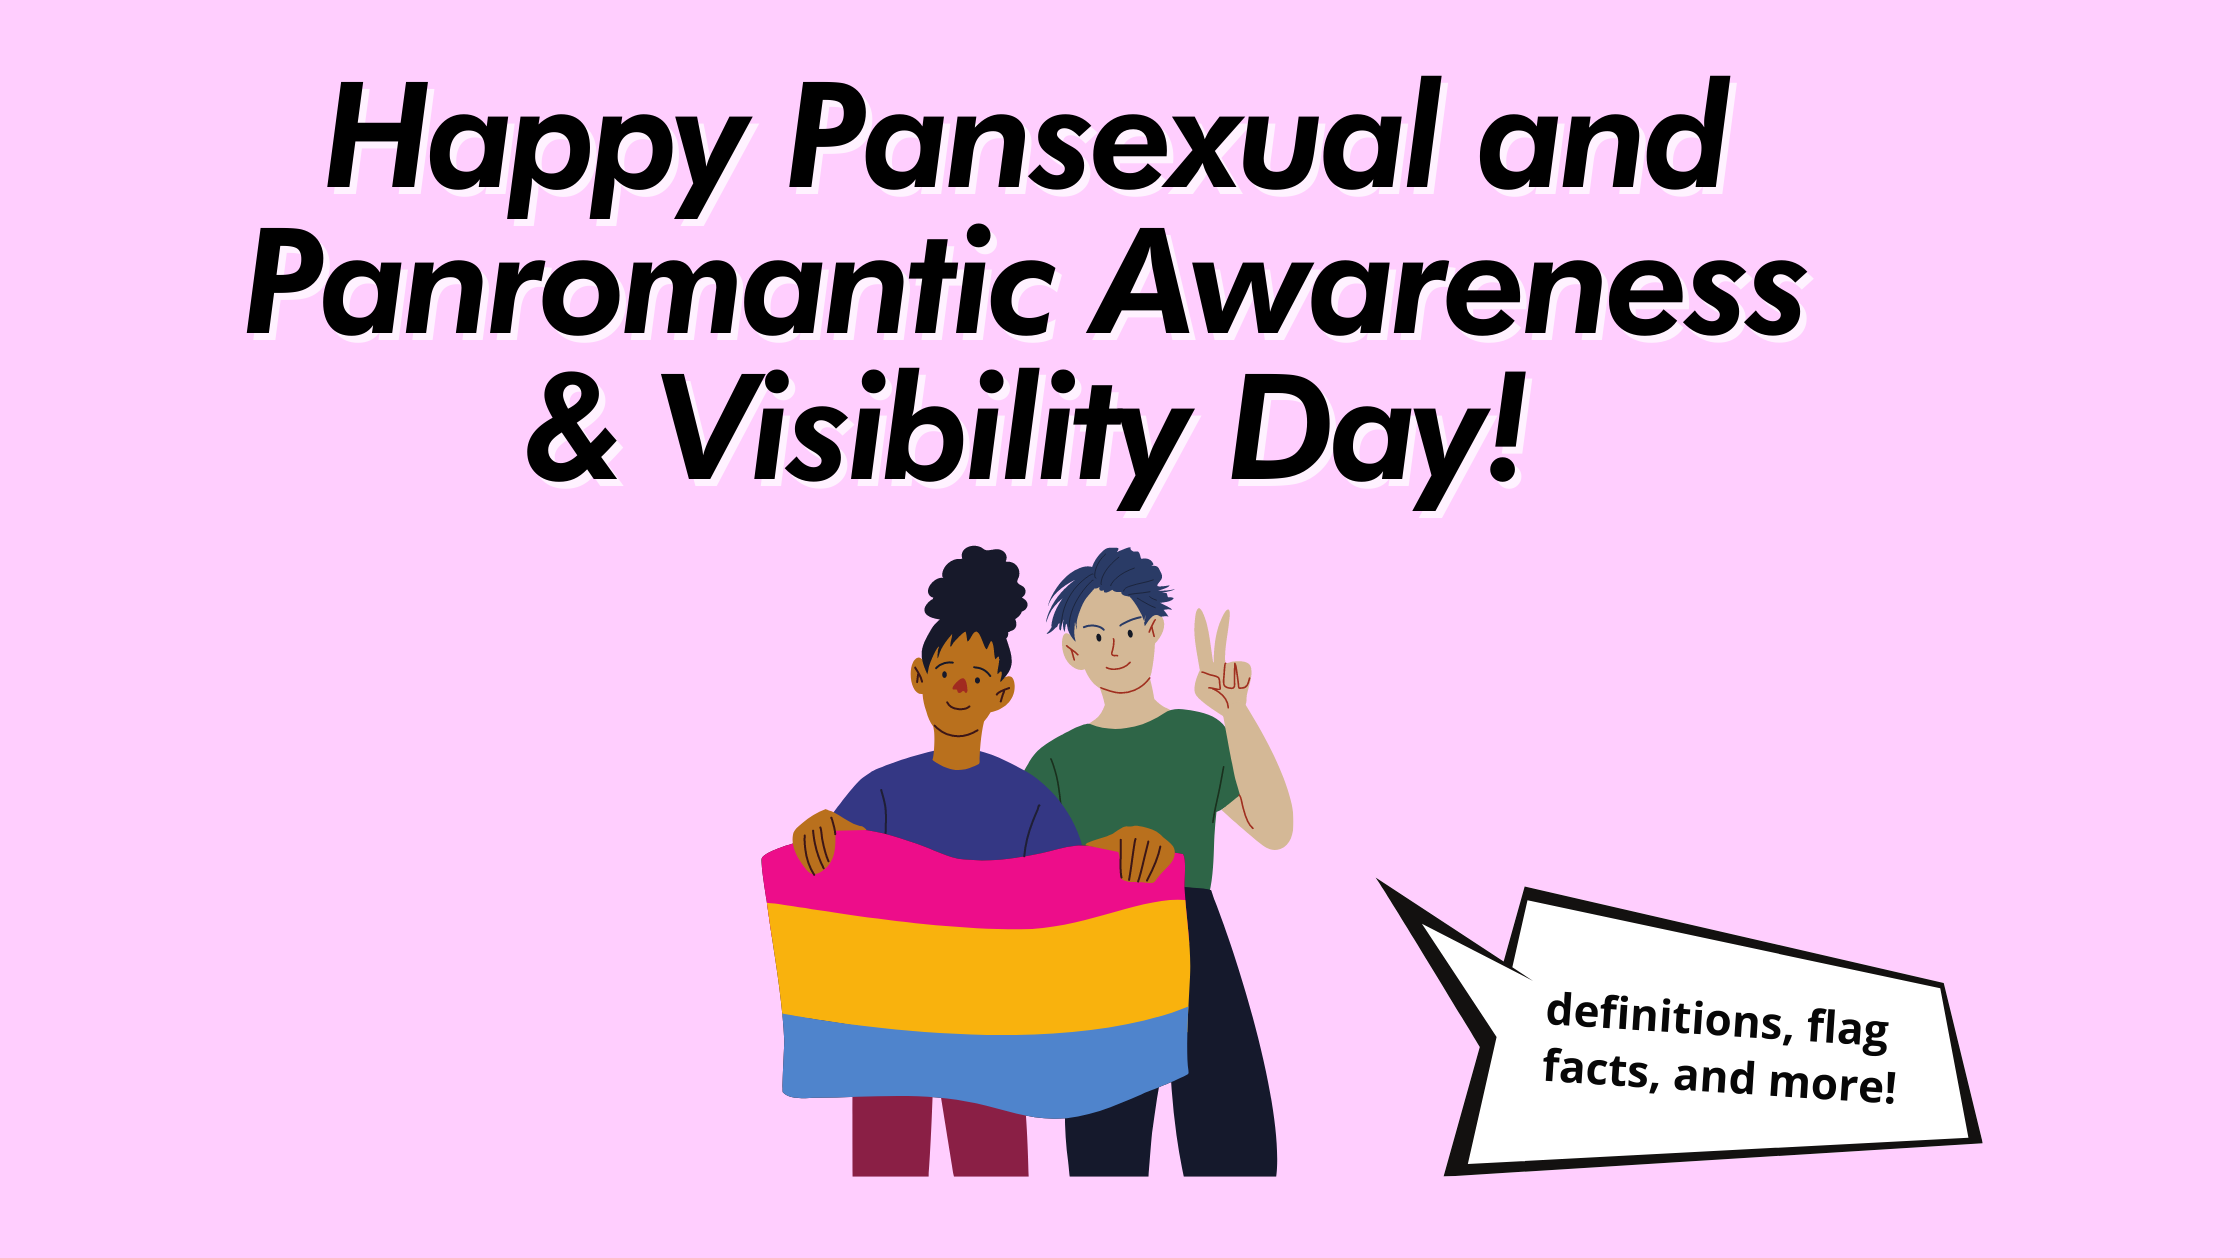 Happy Pansexual and Panromantic Awareness and Visibility Day!